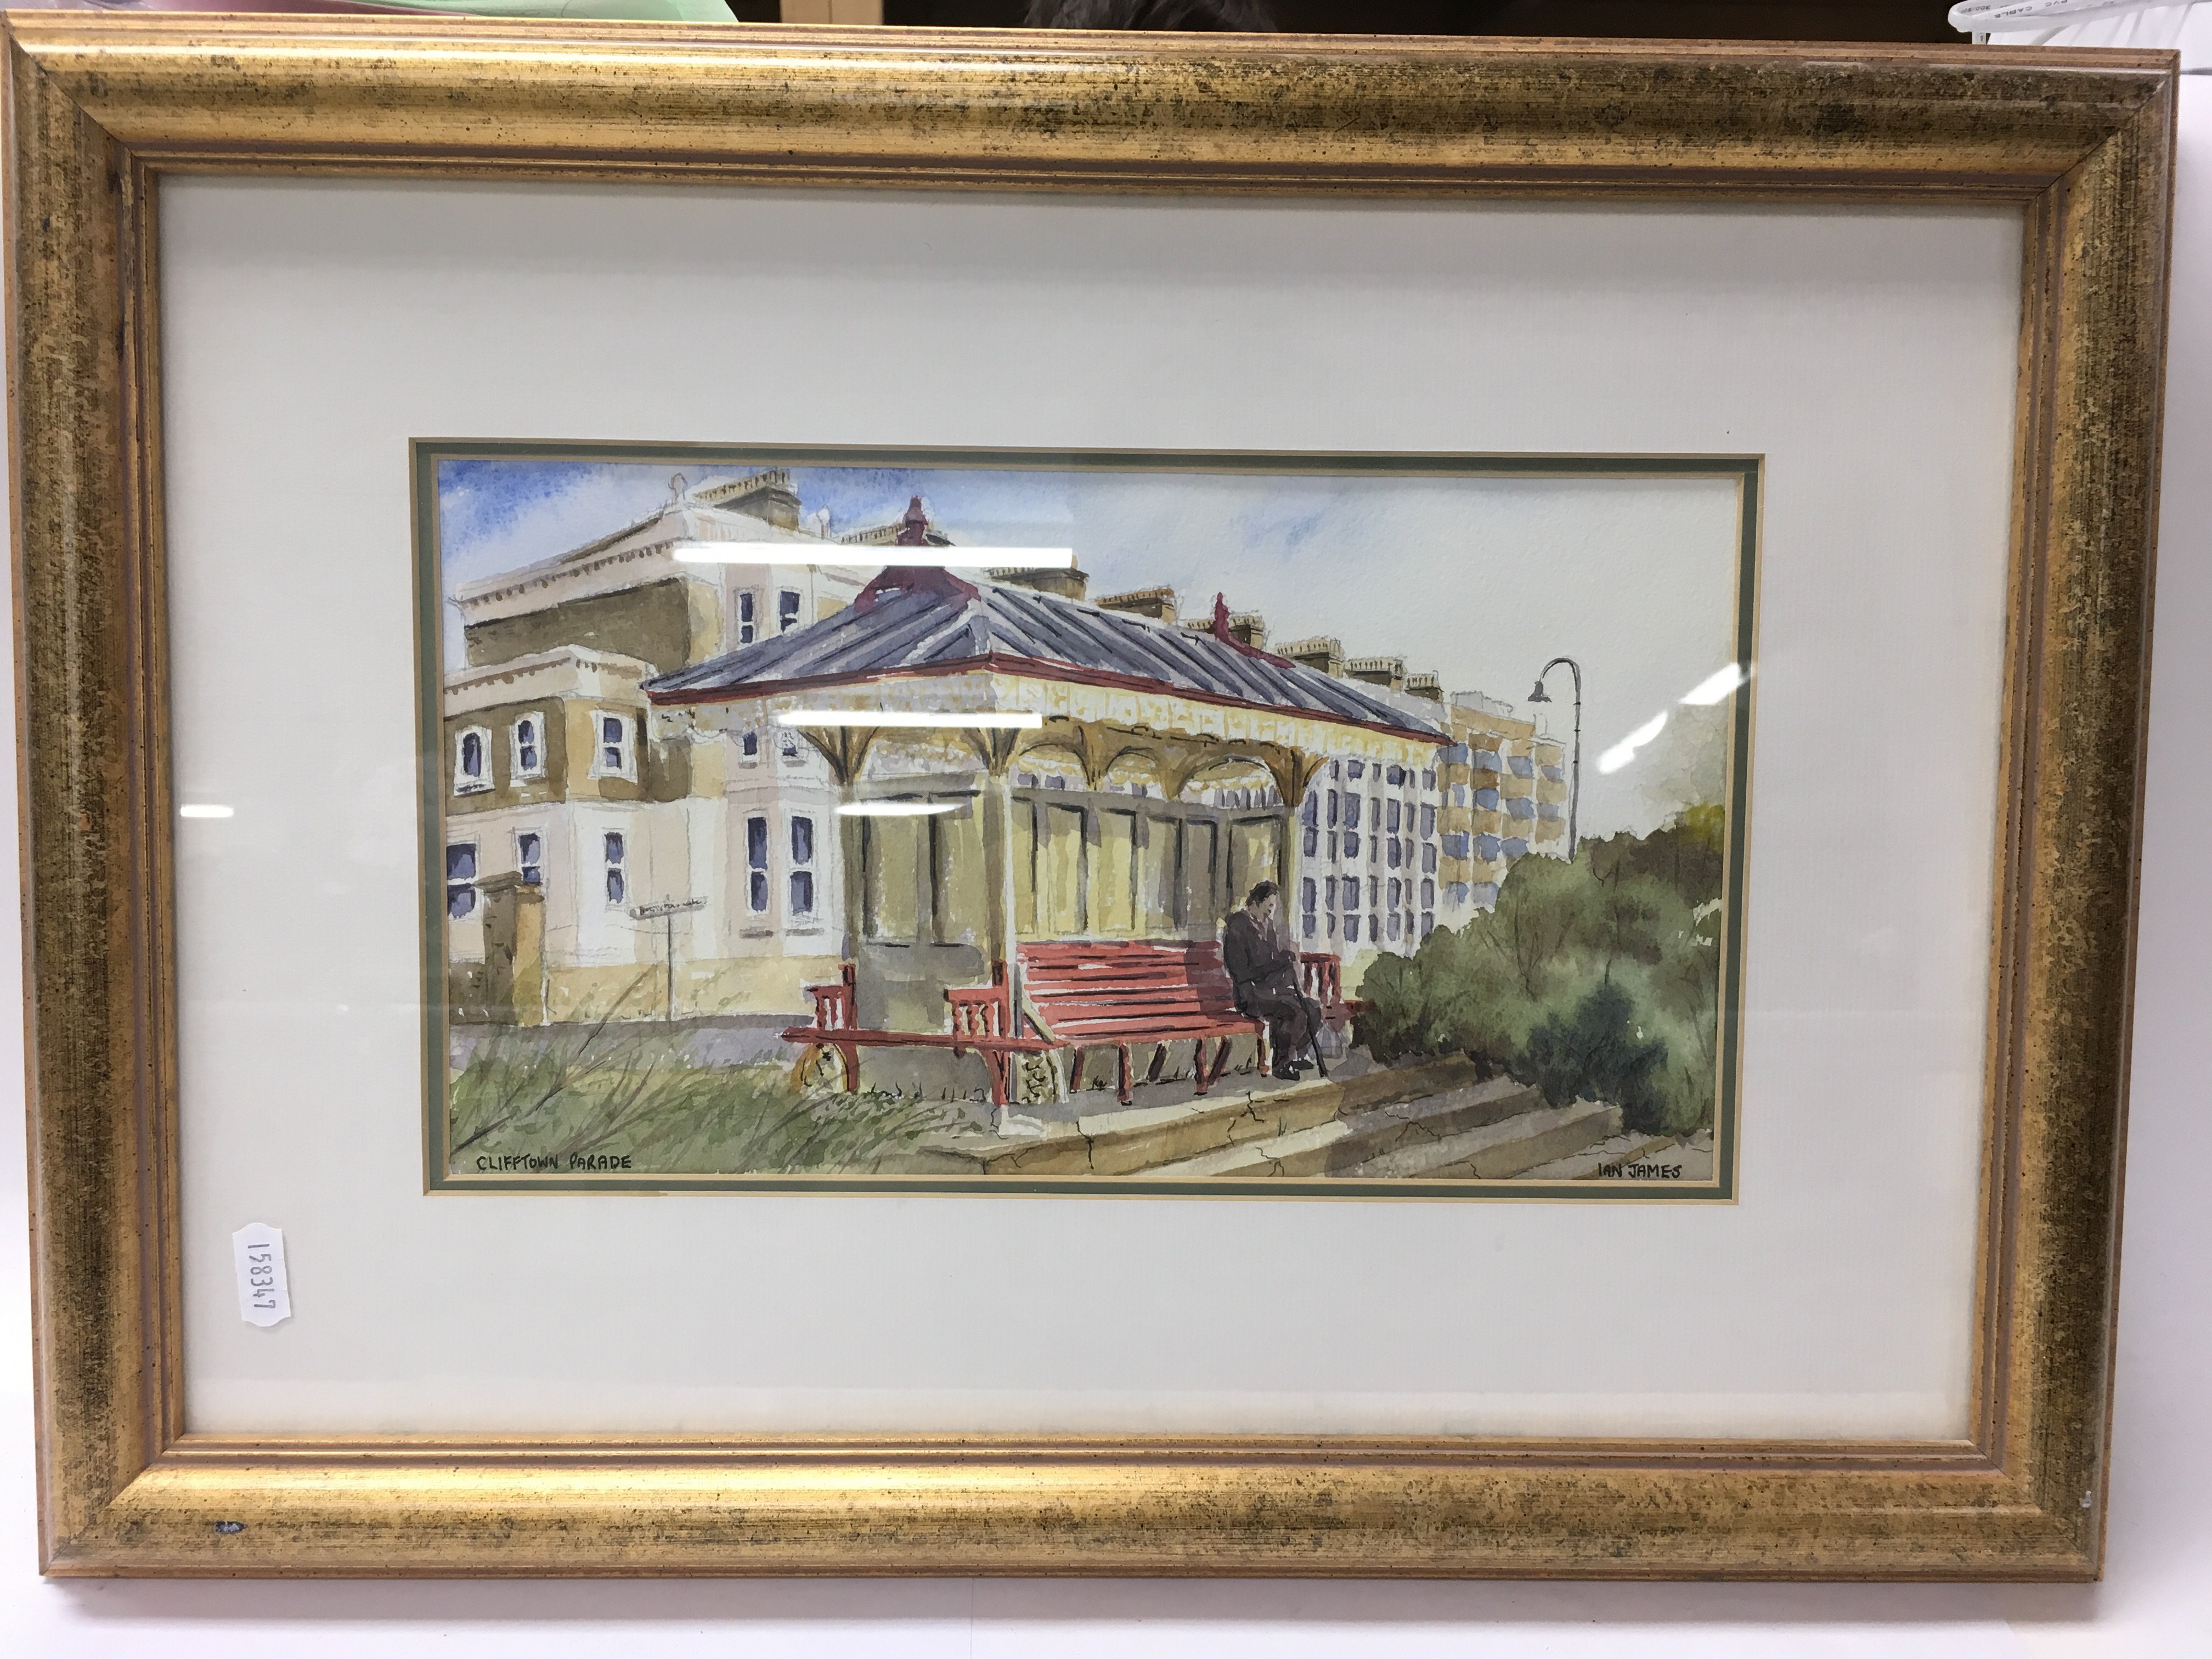 A collection of local interest original watercolours by Ian James along with others. - Image 4 of 4